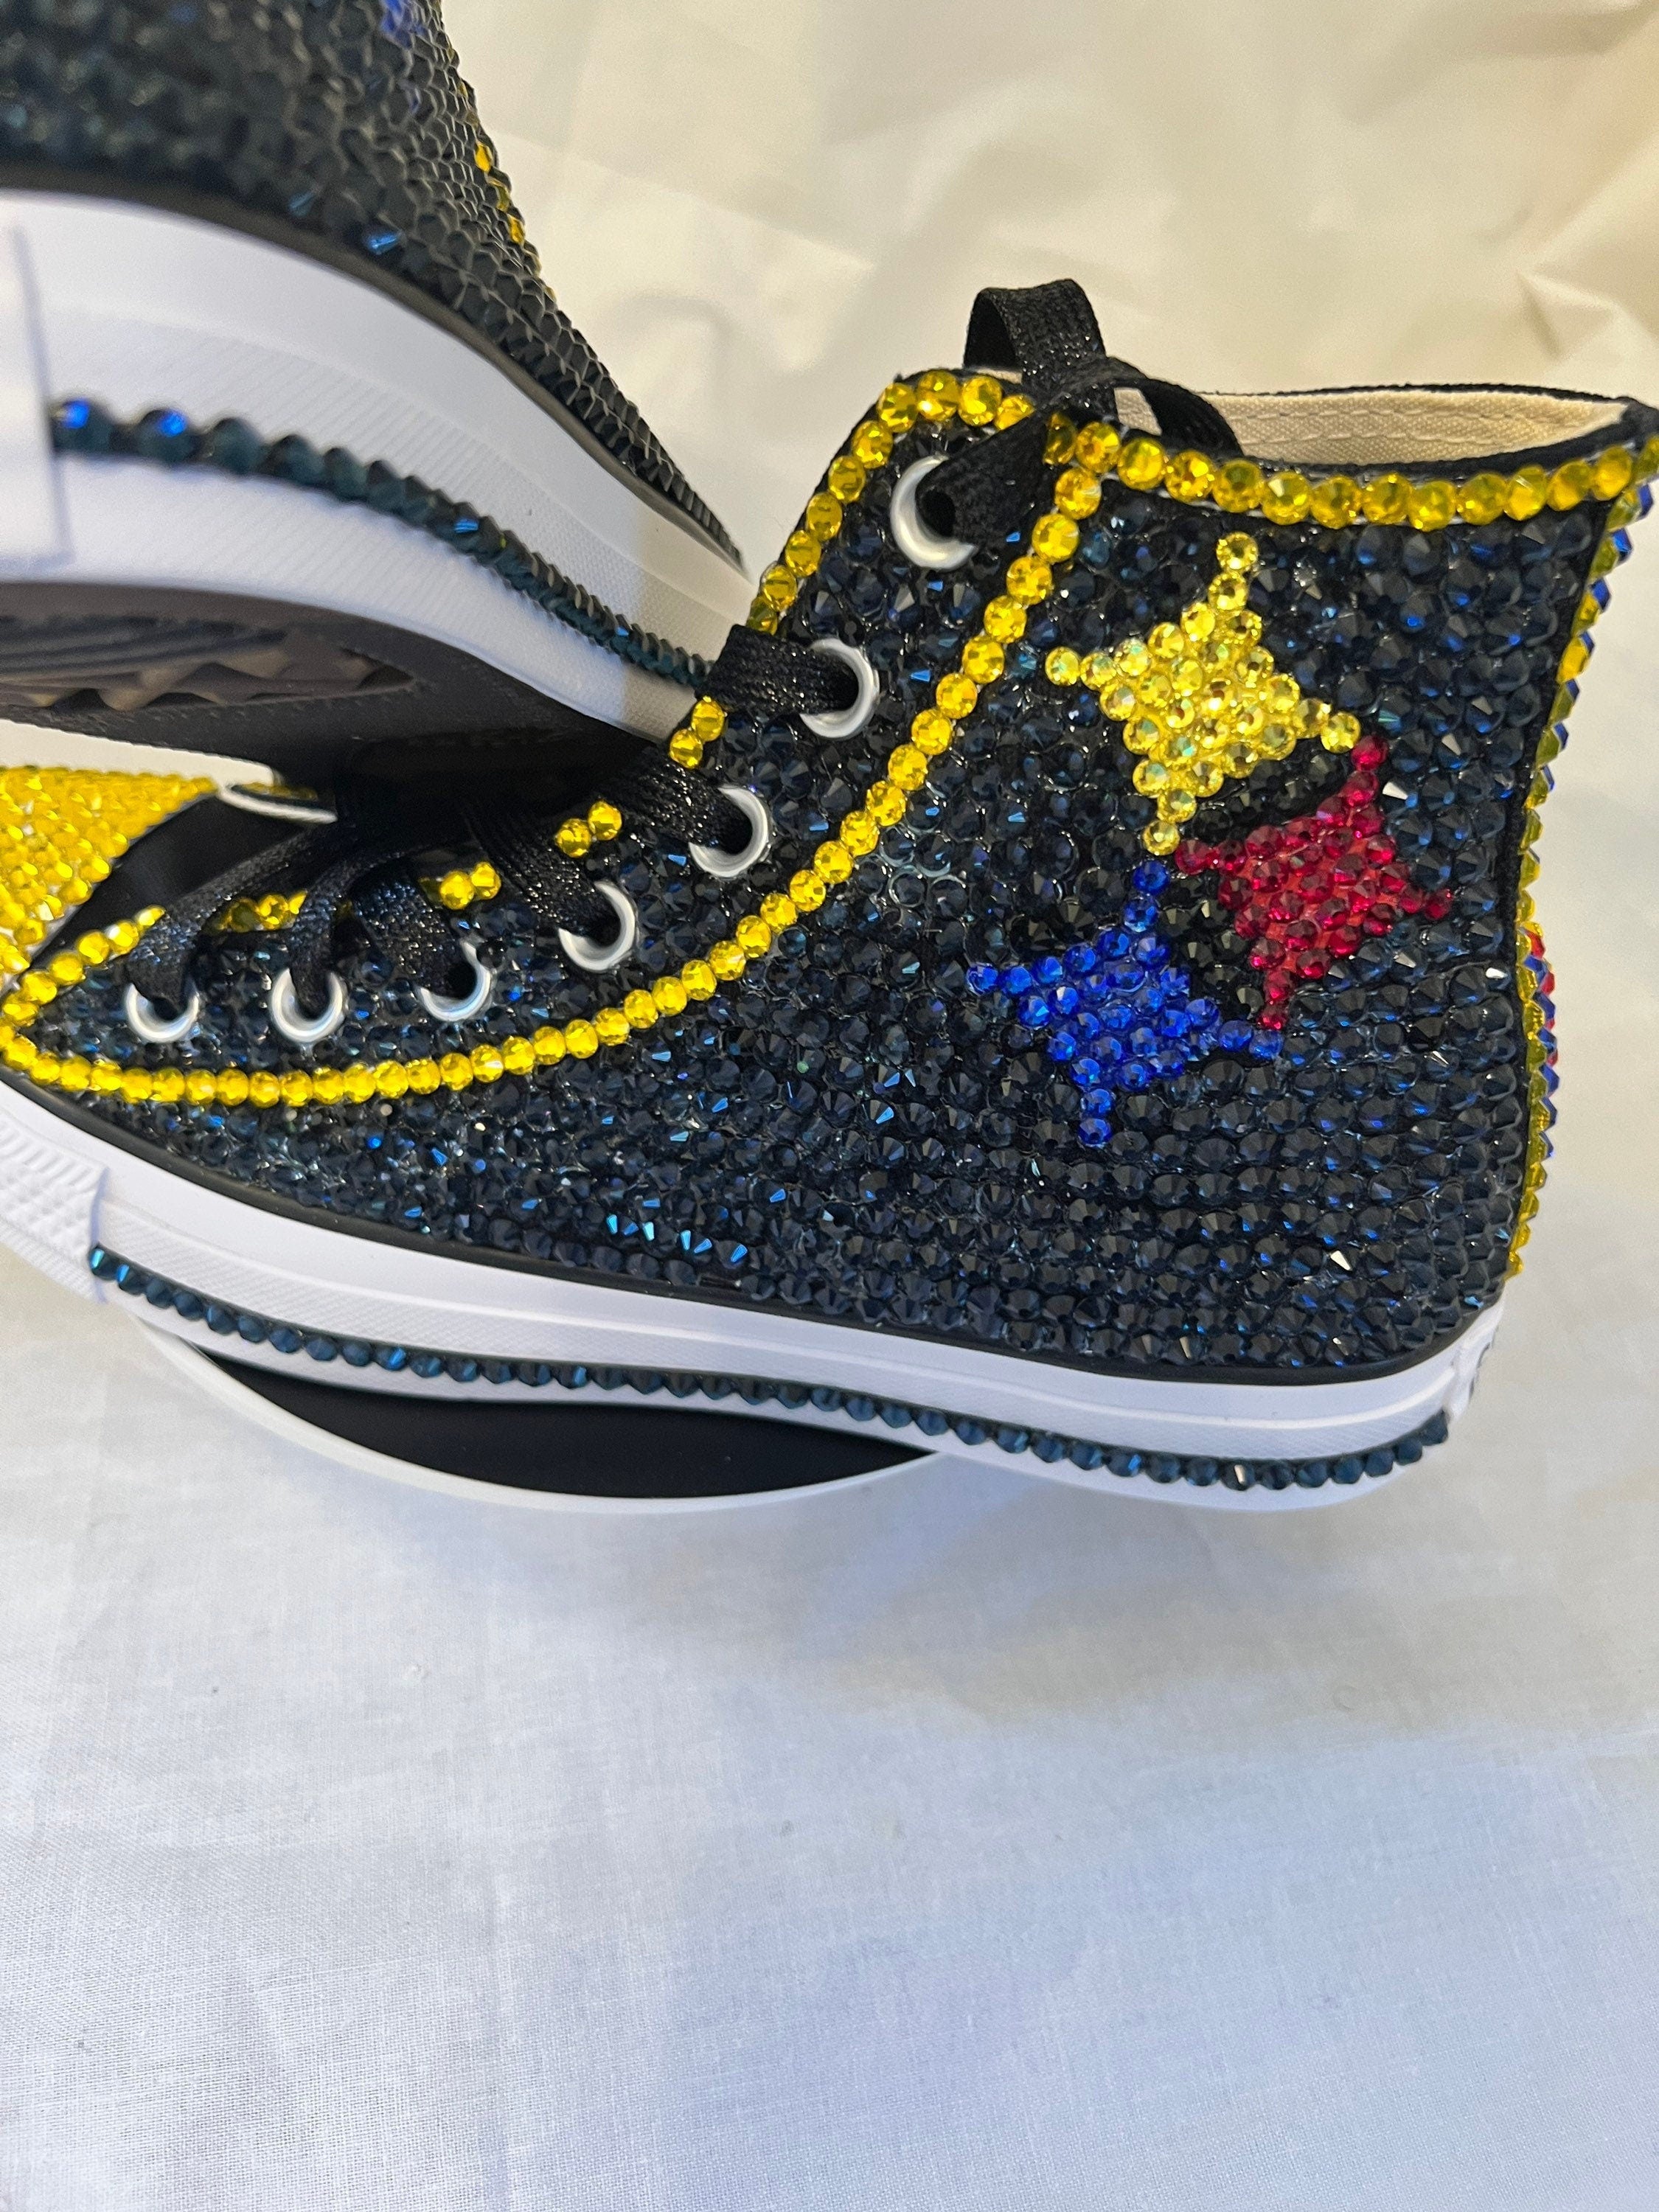 Professional or College Tennis Shoes, converse, wedding, quinceanera, –  Allblingedoutitn Bling Boutique